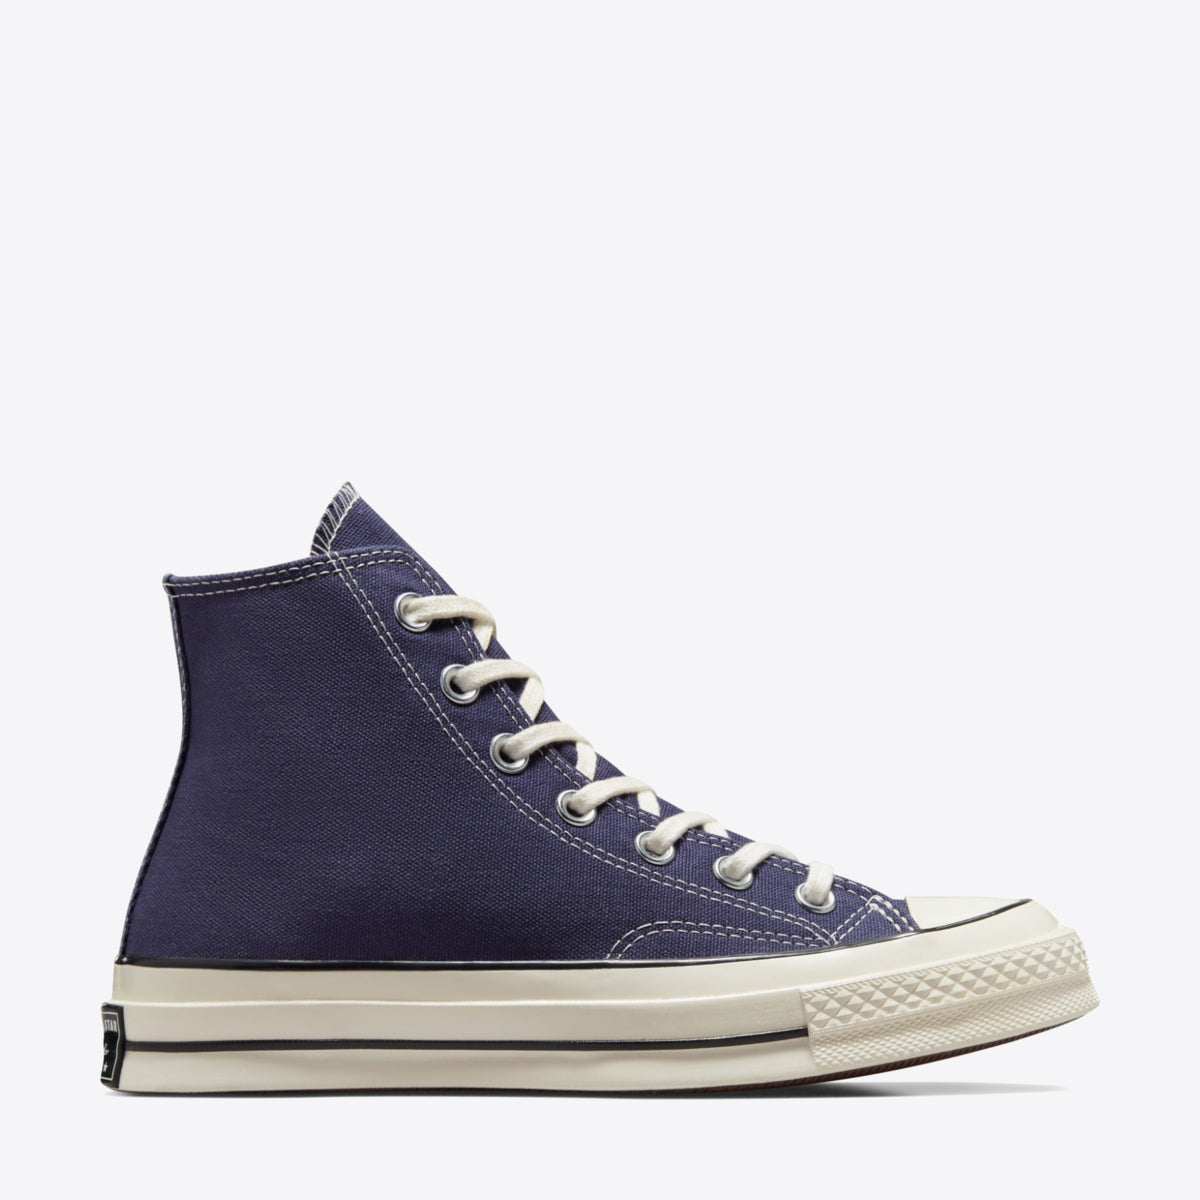 CONVERSE Chuck Taylor 70 Seasonal High Uncharted Waters/Egret - Image 9